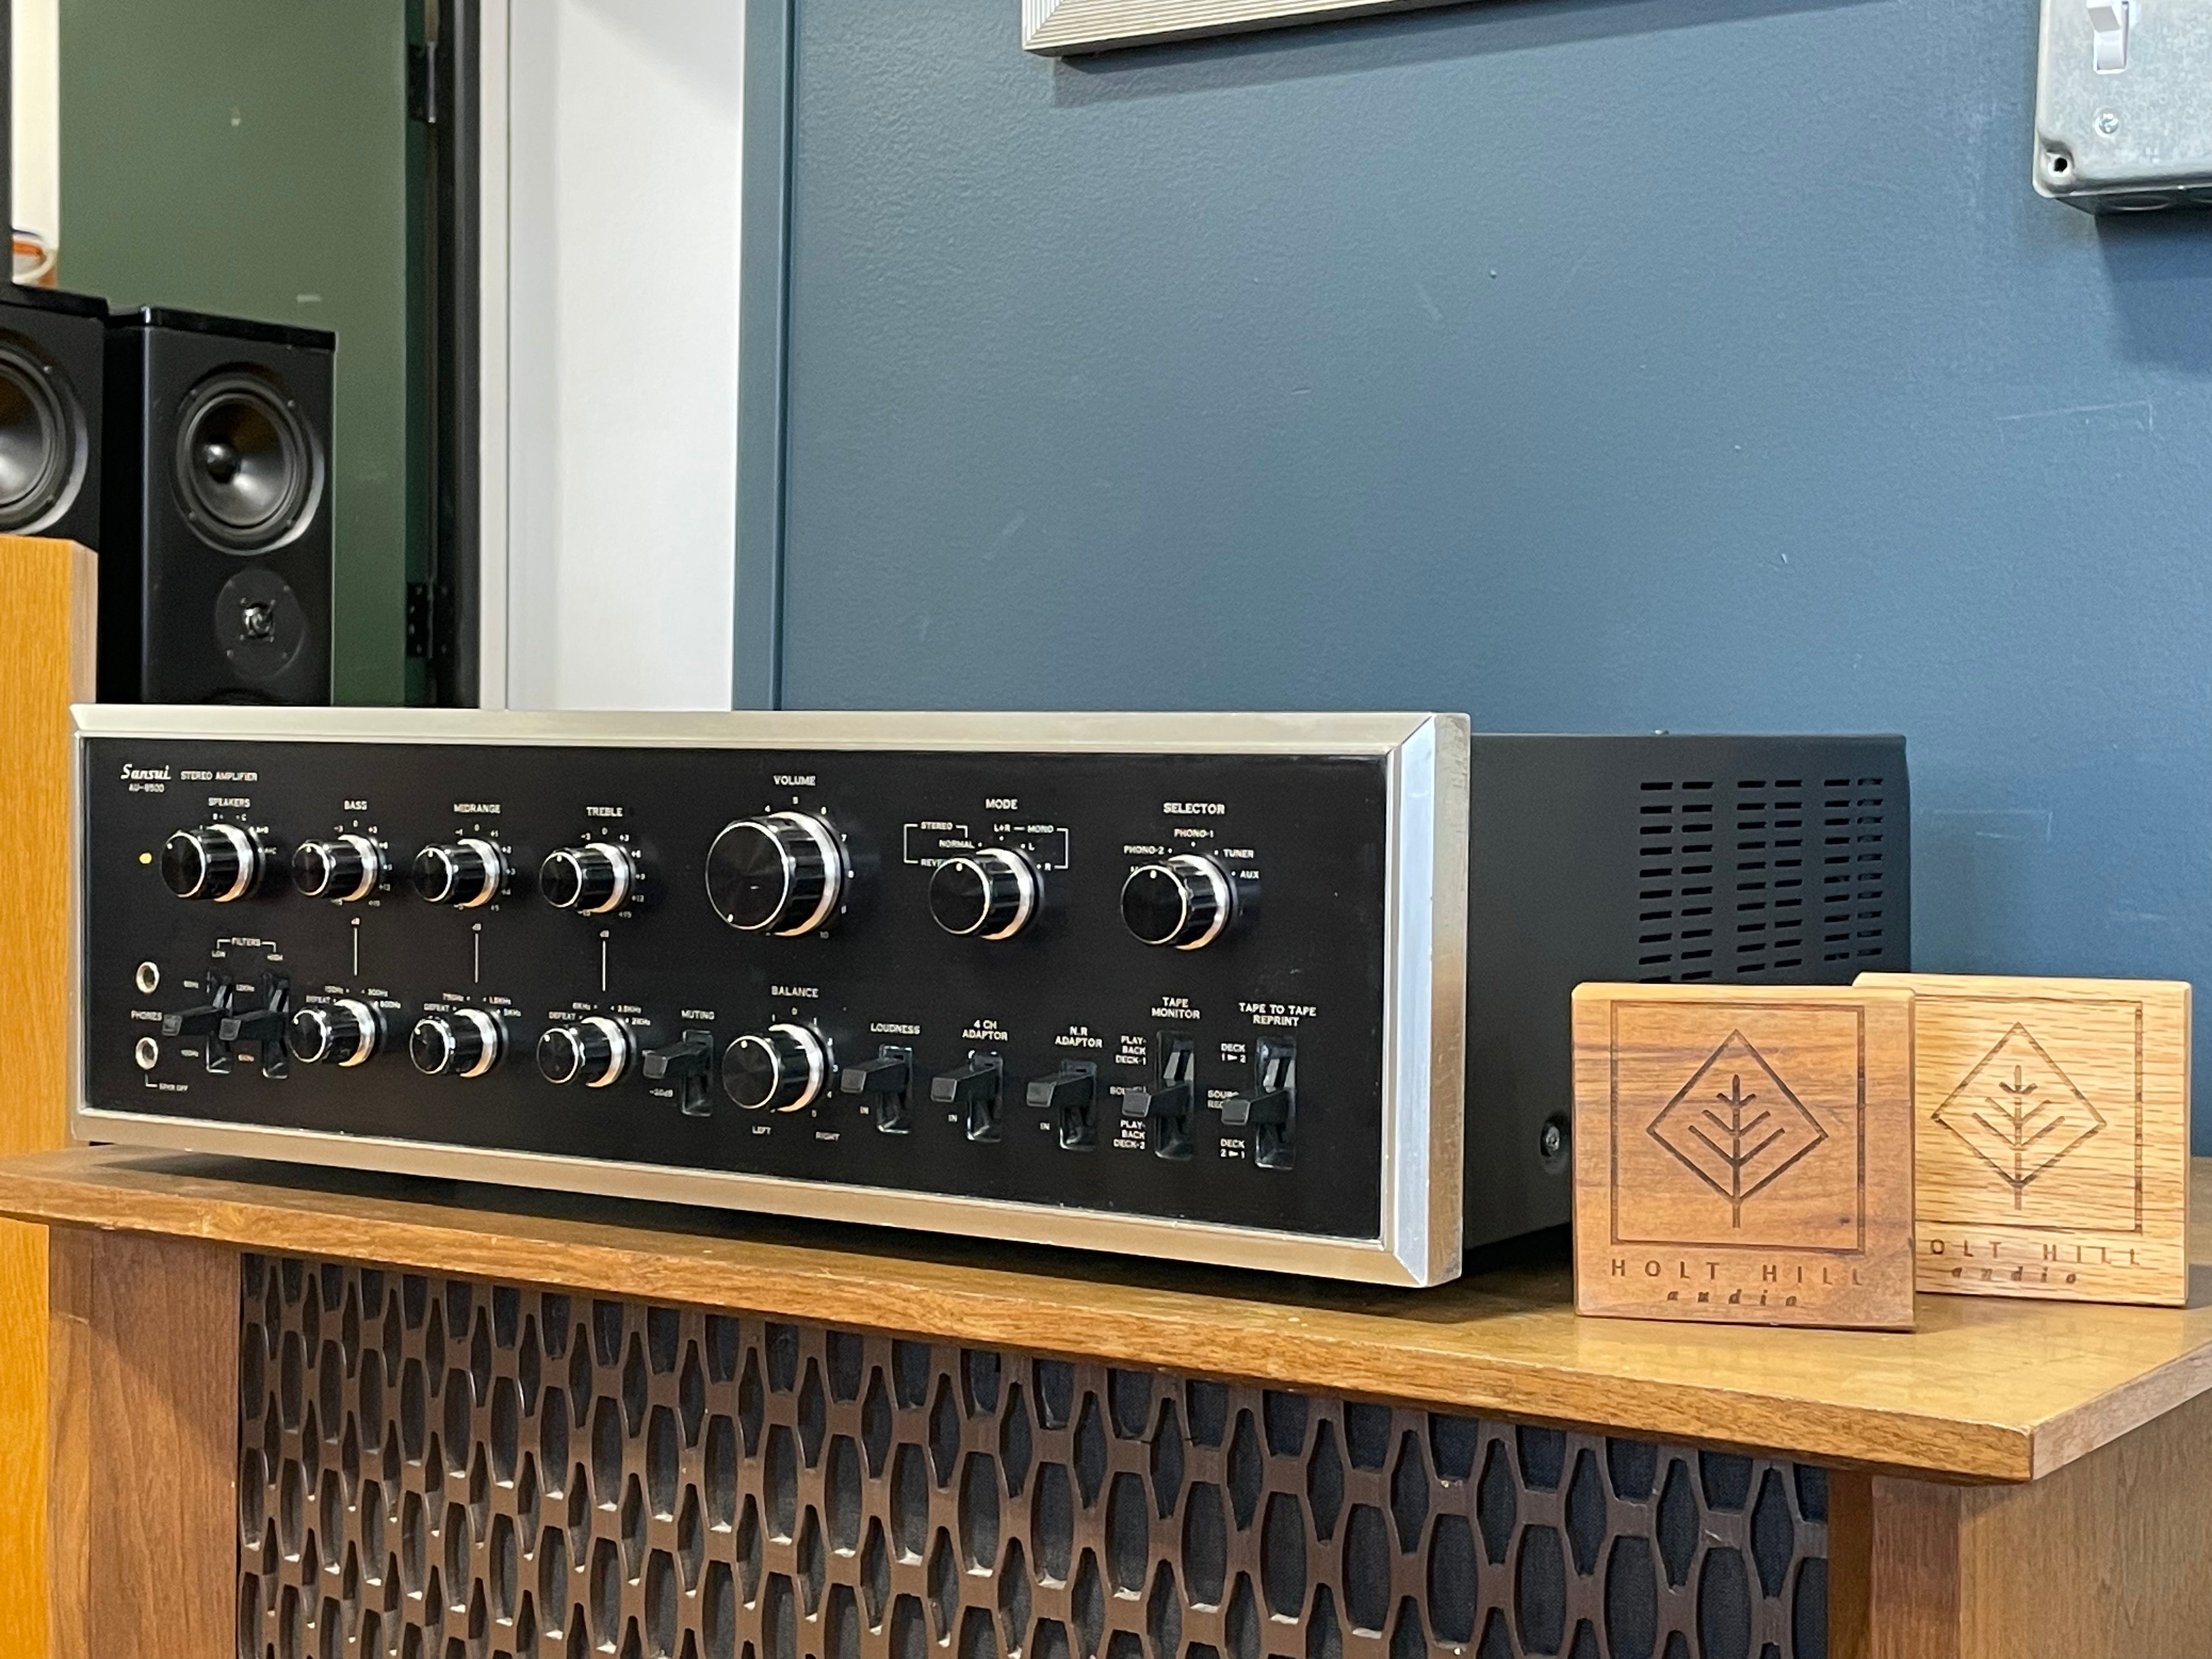 Sansui, AU-9500 "One of the Greatest Vintage Integrated Amps Ever!" - SOLD